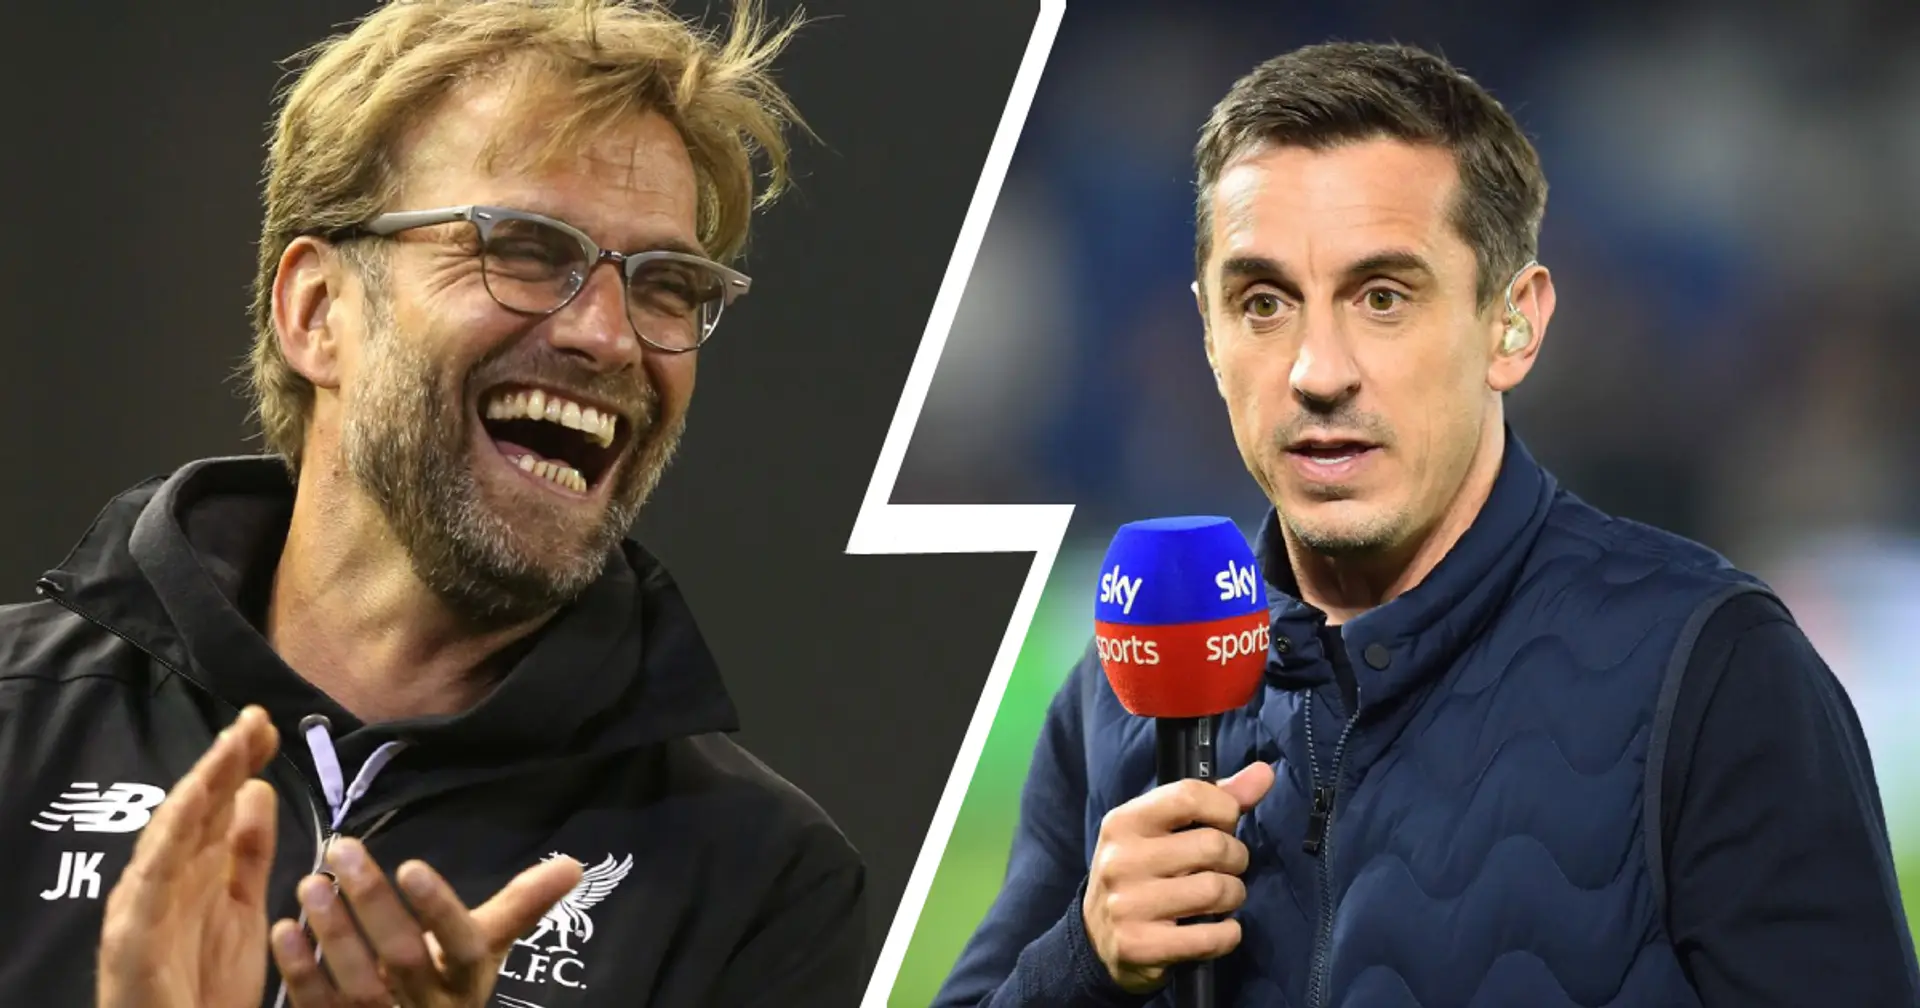 Gary Neville: 'I am starting to feel confident Man United could challenge Liverpool next season'